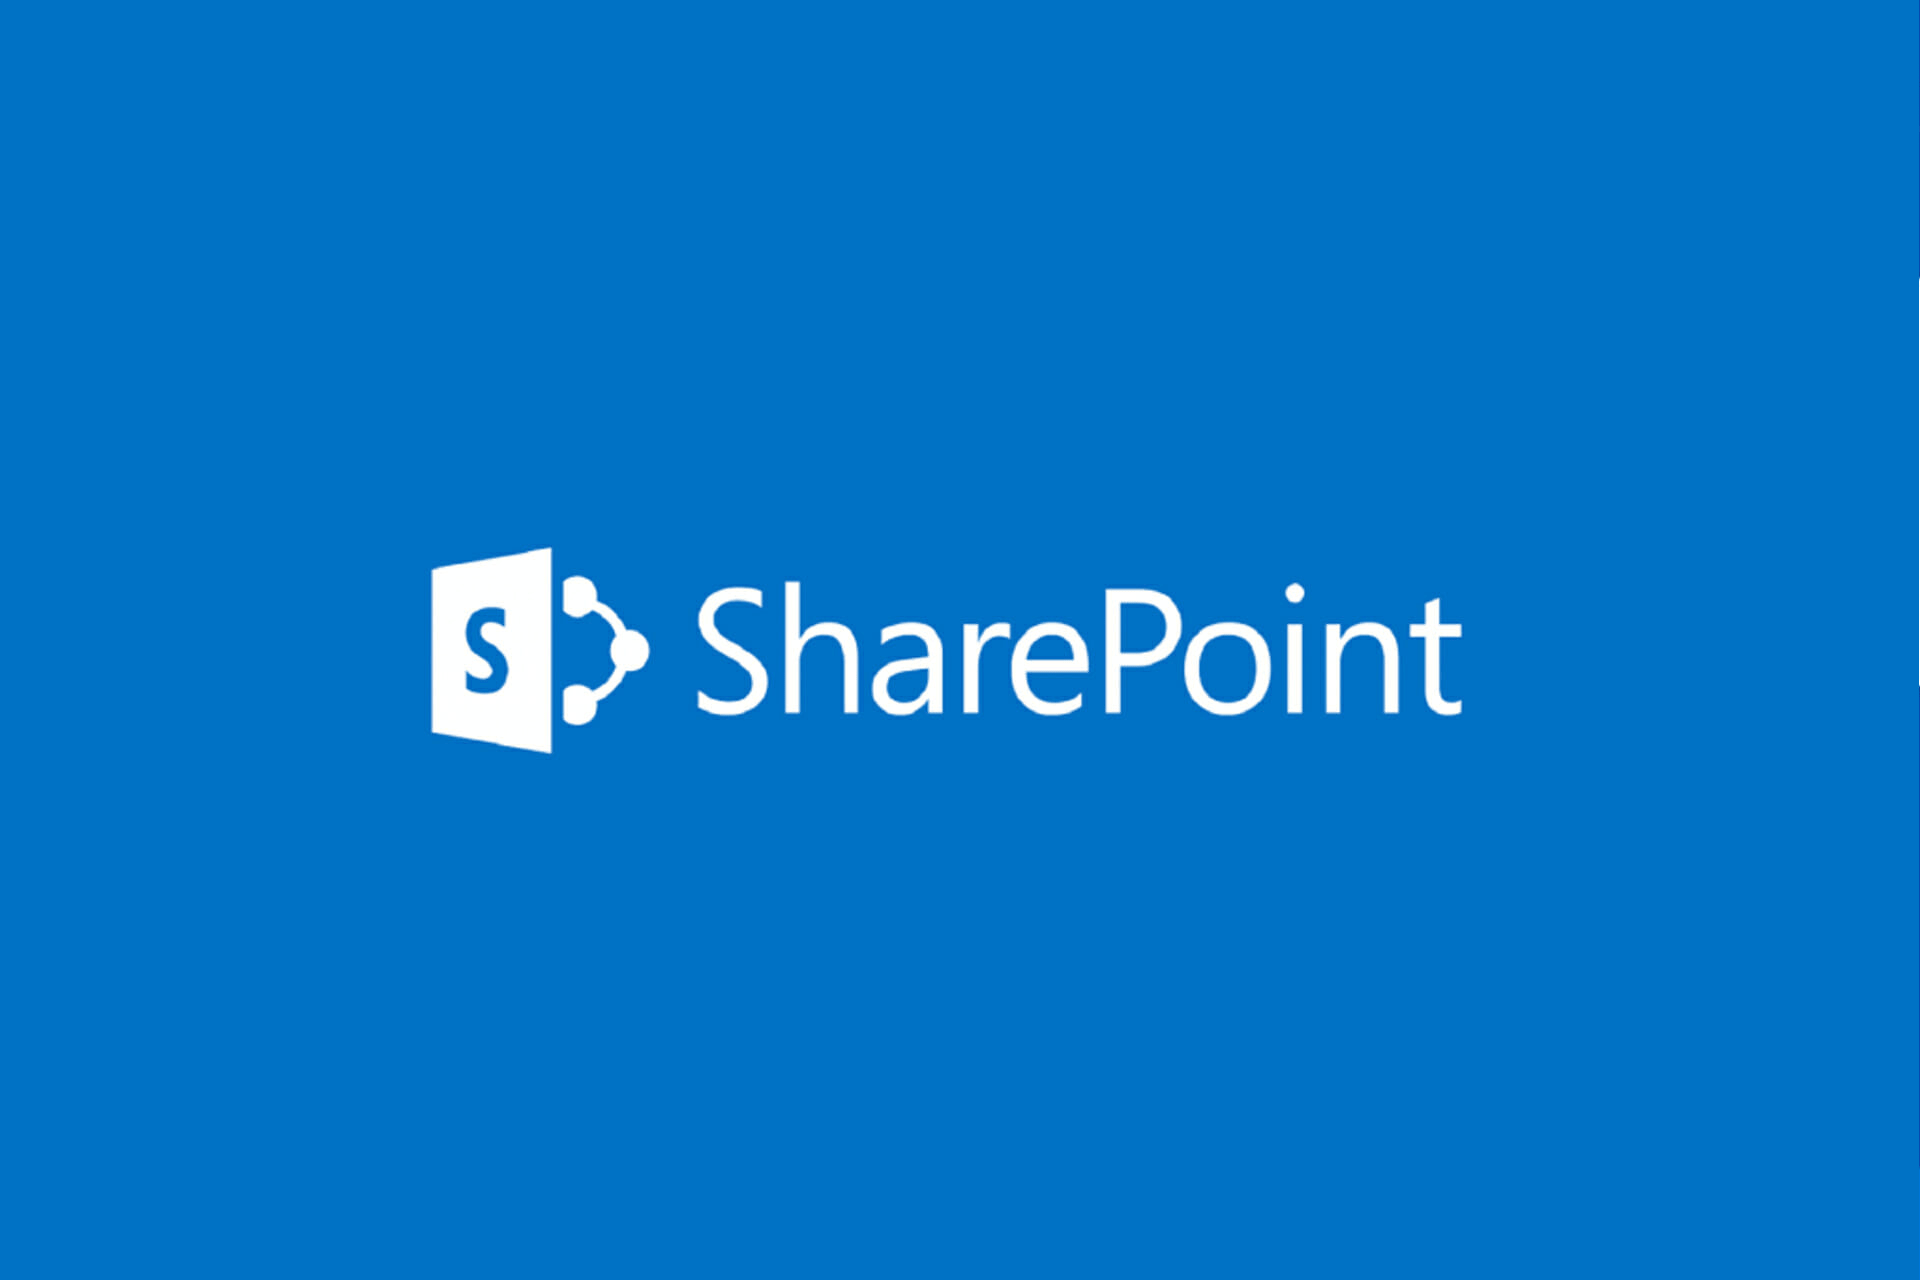 How to sync SharePoint to OneDrive